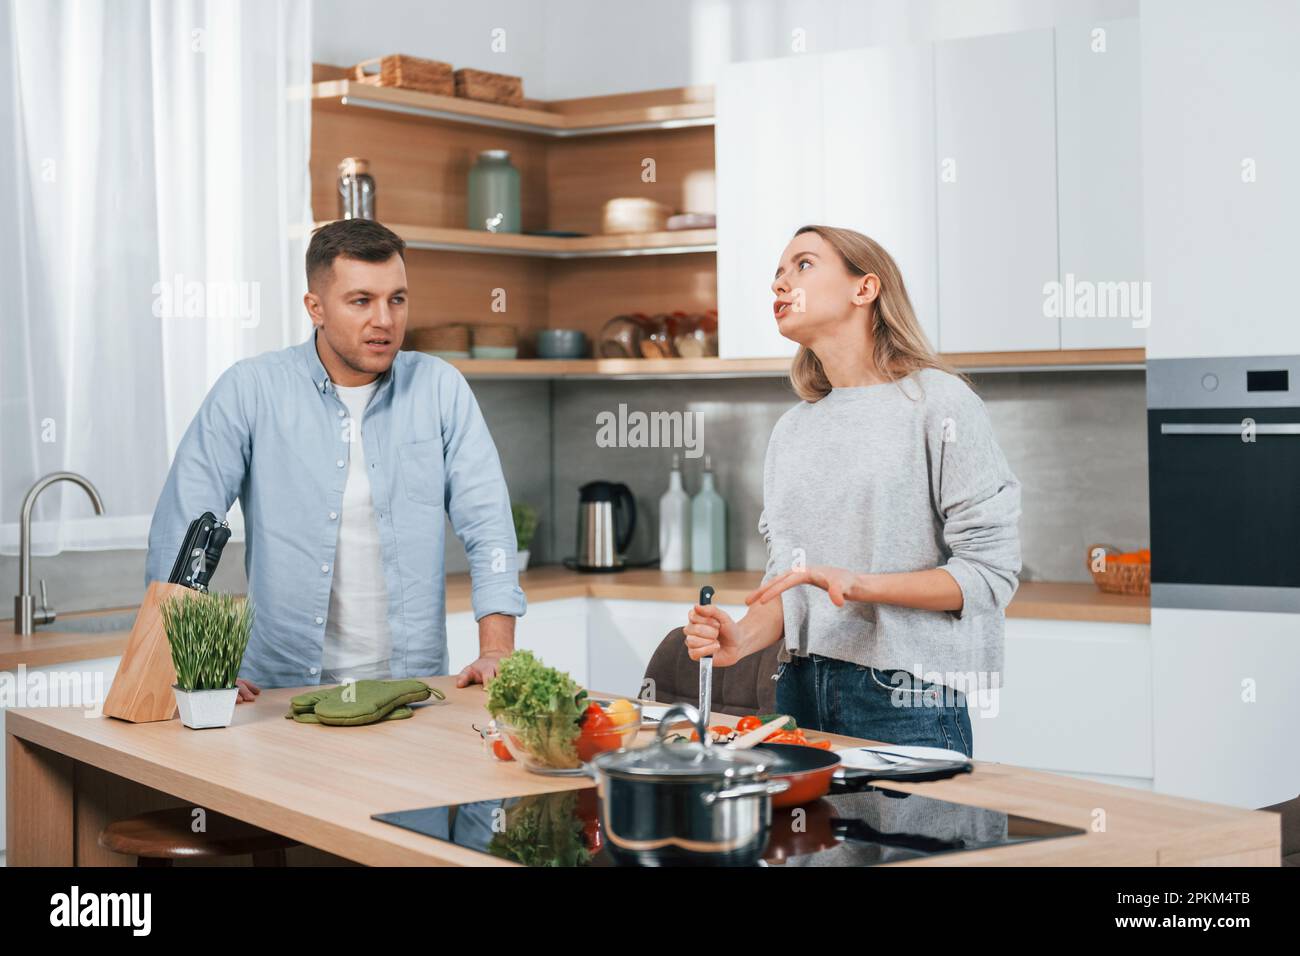 Arguing with each other. Couple preparing food at home on the modern kitchen. Stock Photo